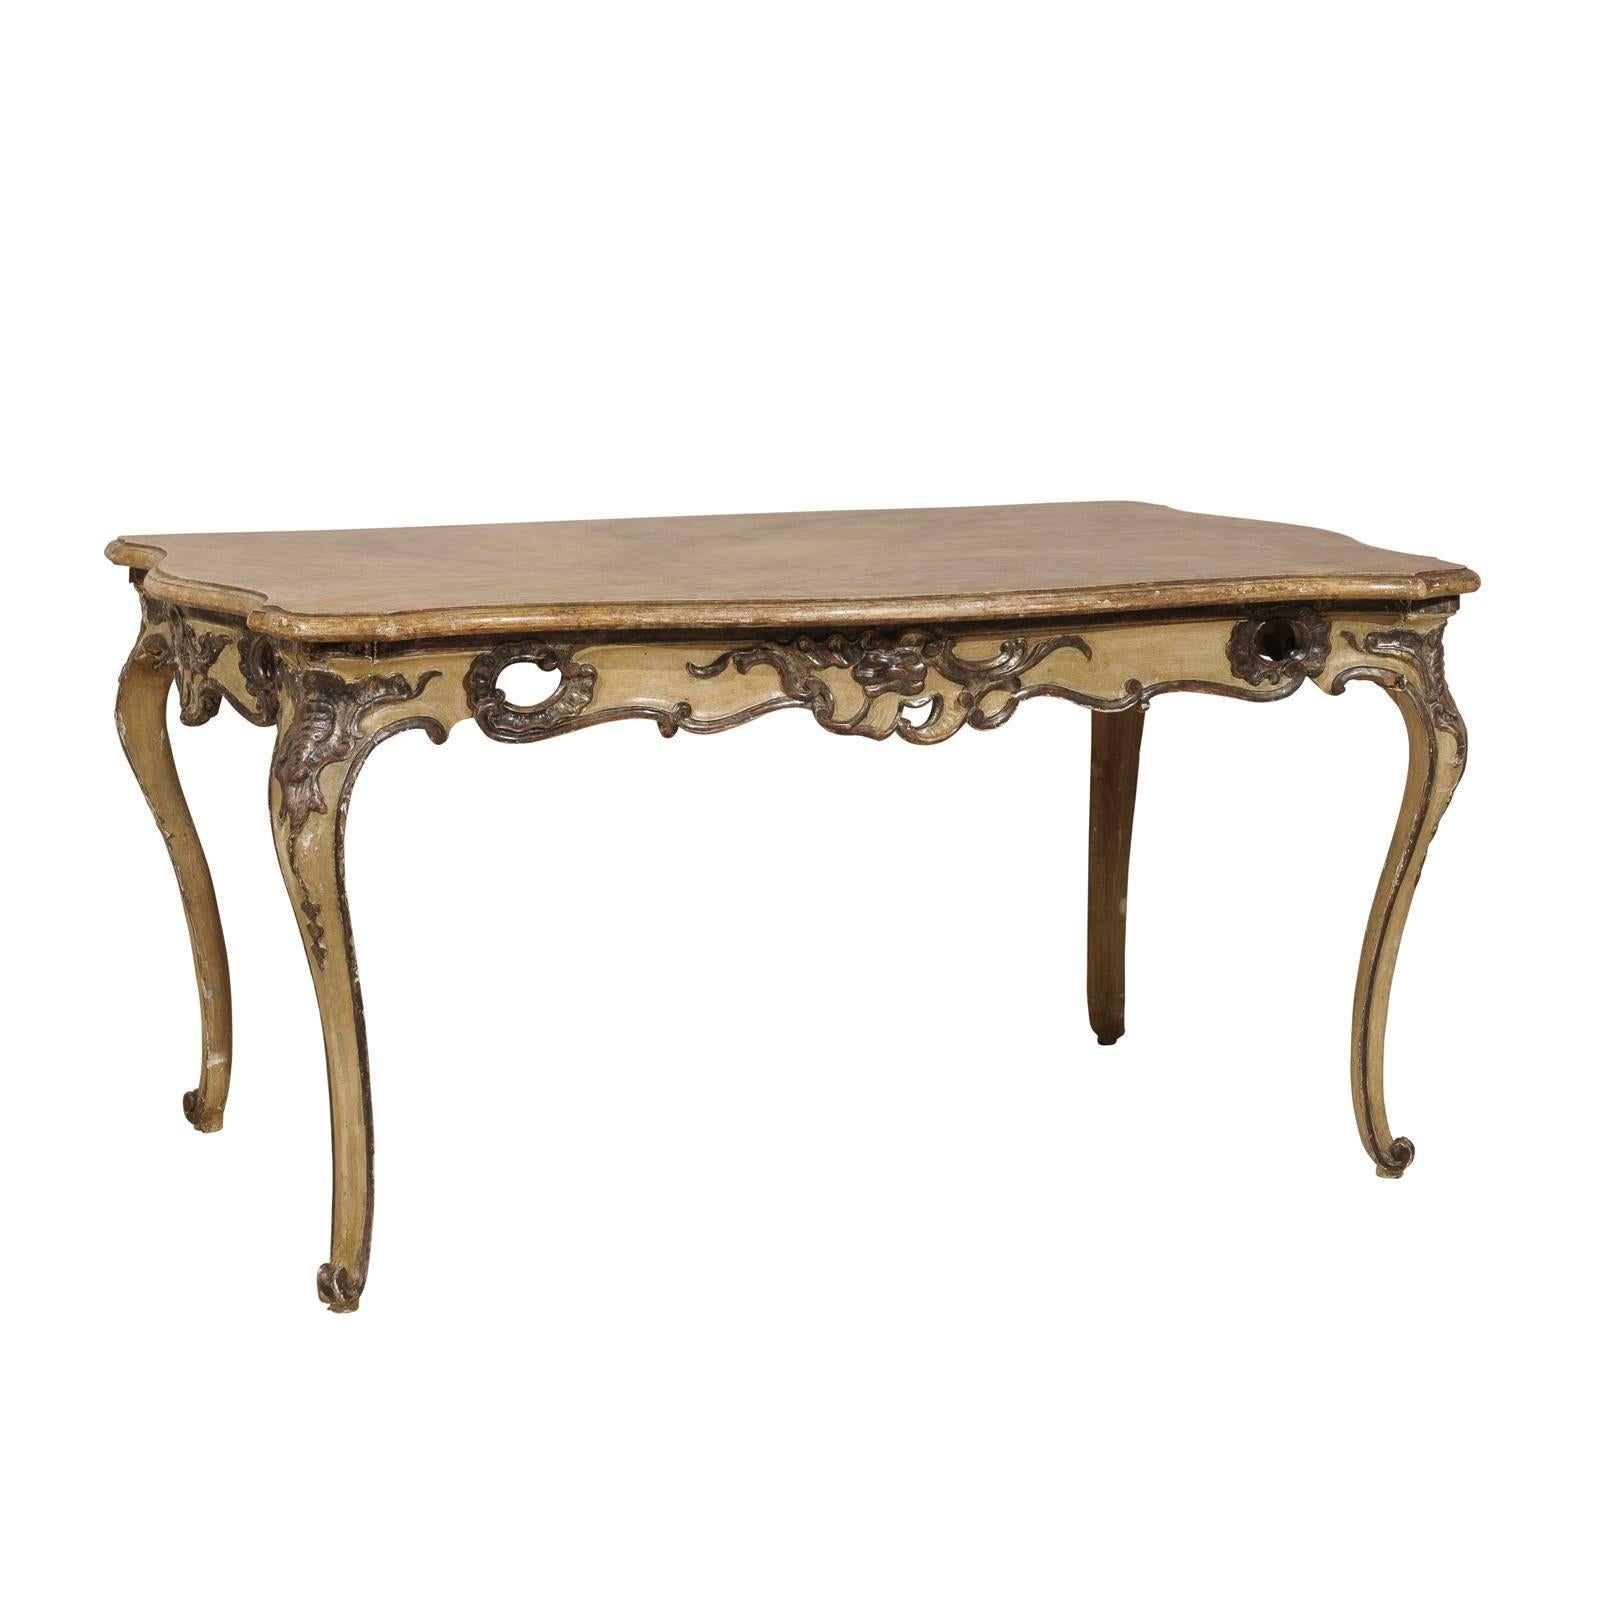 Italian Rococo Style Table, Desk With Faux-Marble Top, 19th Century For Sale